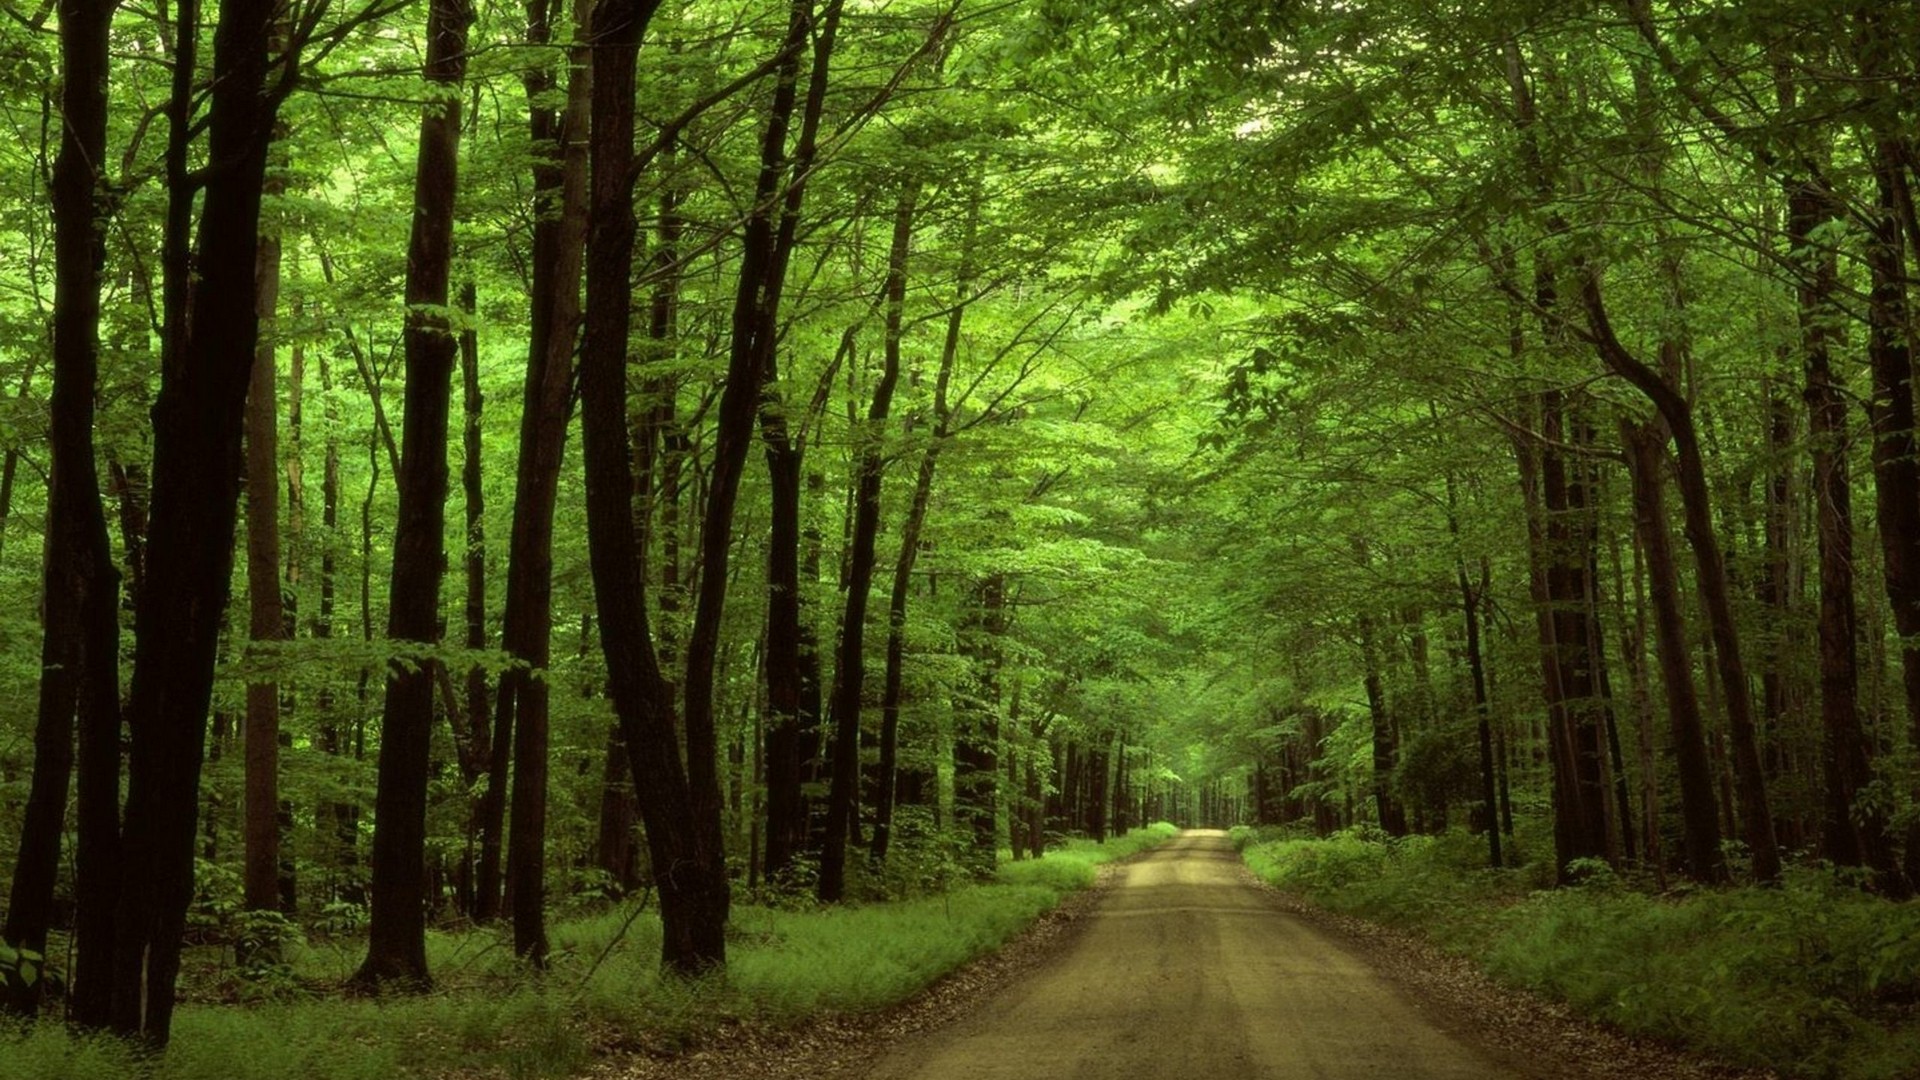 General 1920x1080 trees road forest dirt road outdoors plants